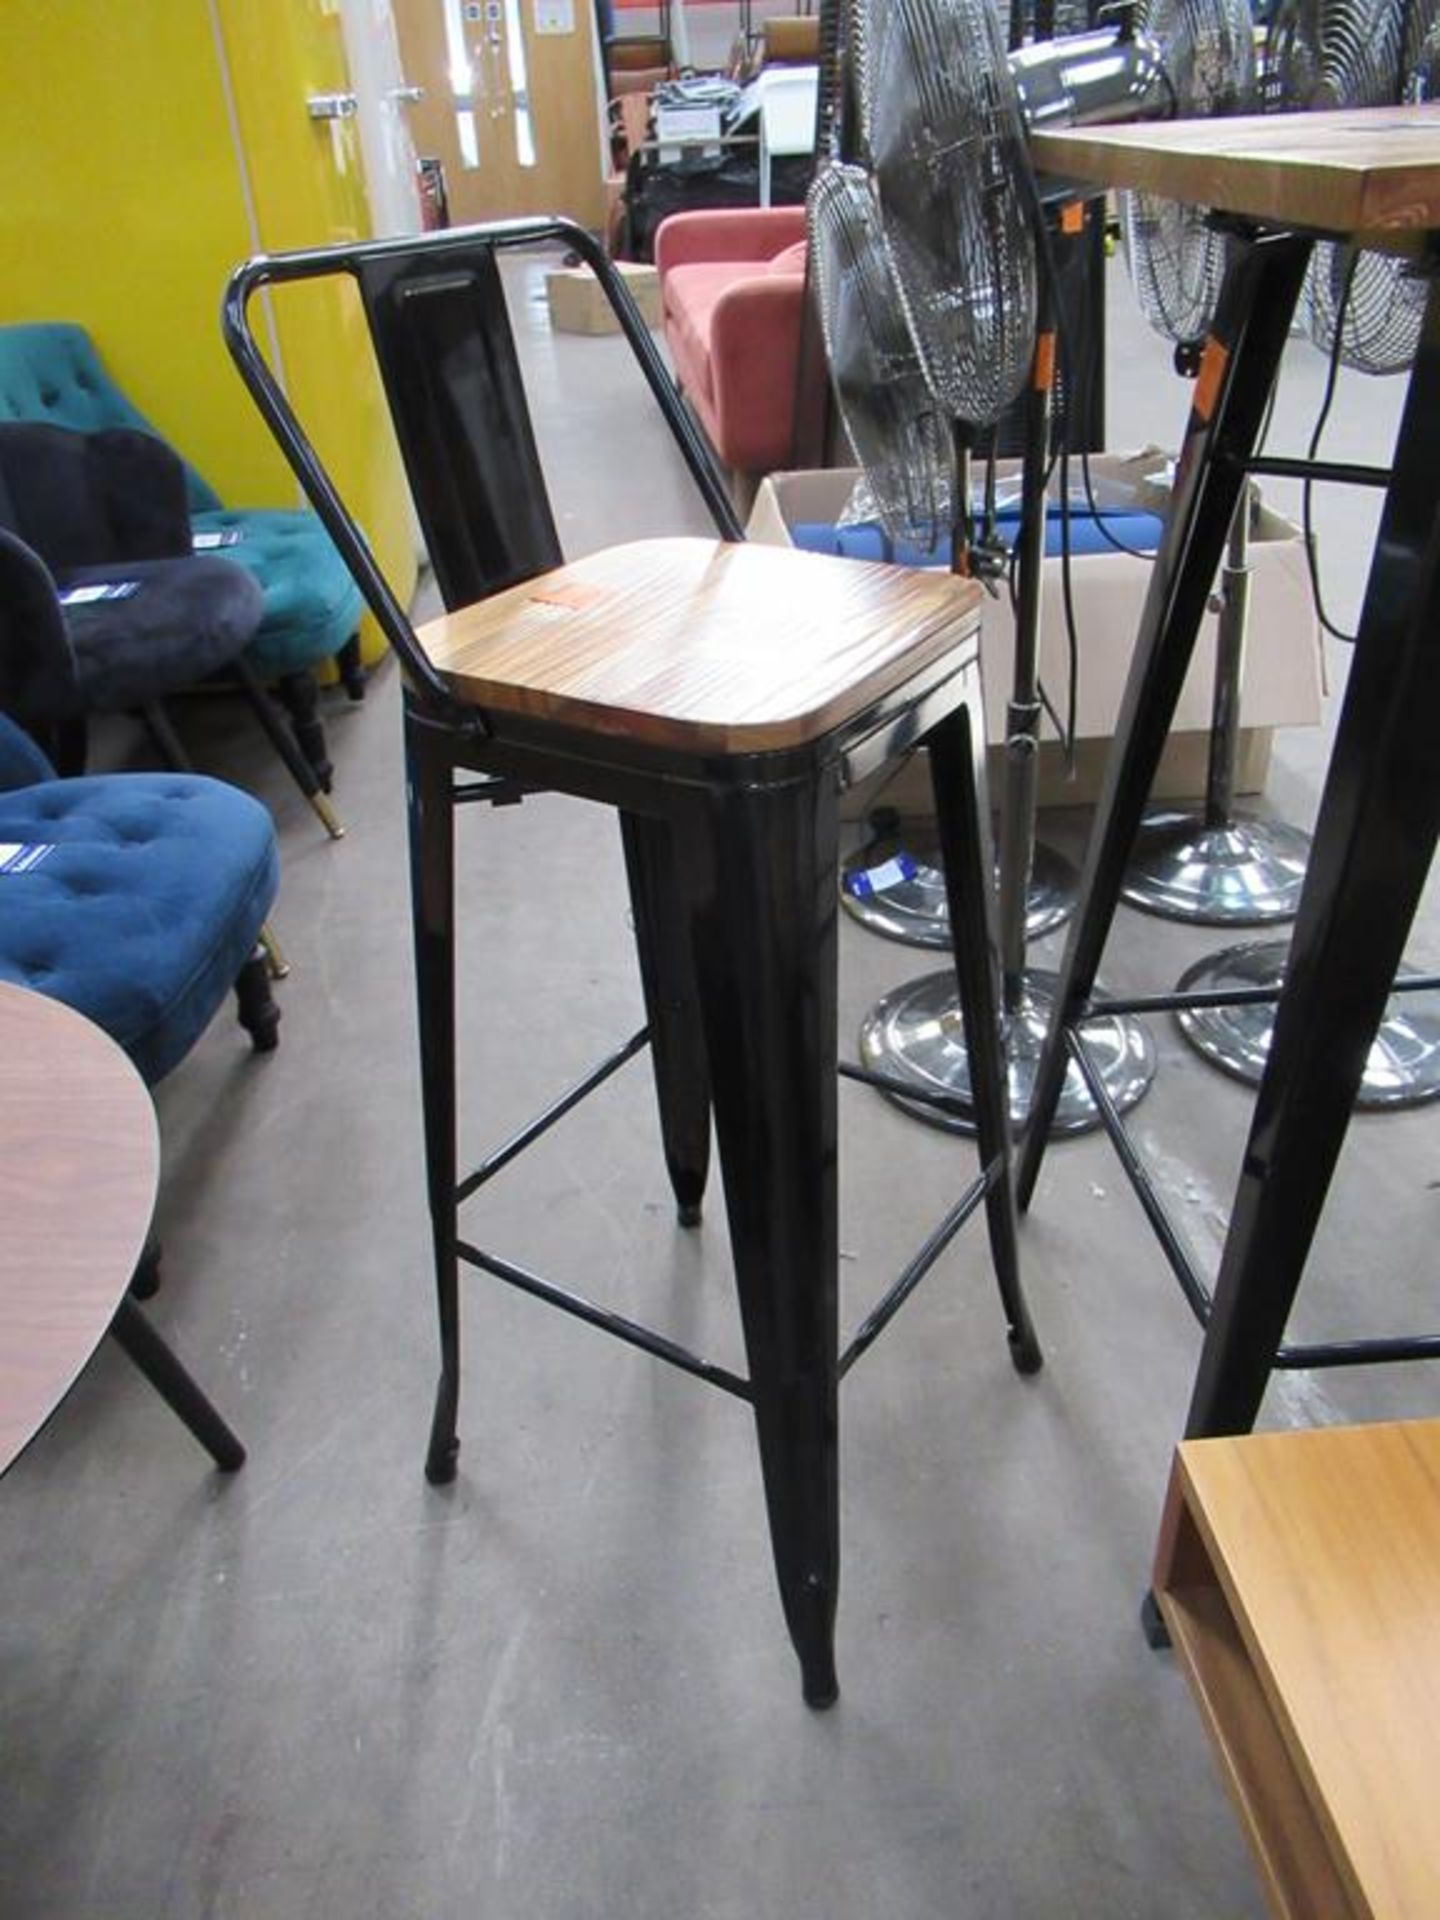 Wooden Topped, Black Painted, Metal Based Table and 2x Matching Highchairs. - Image 2 of 4